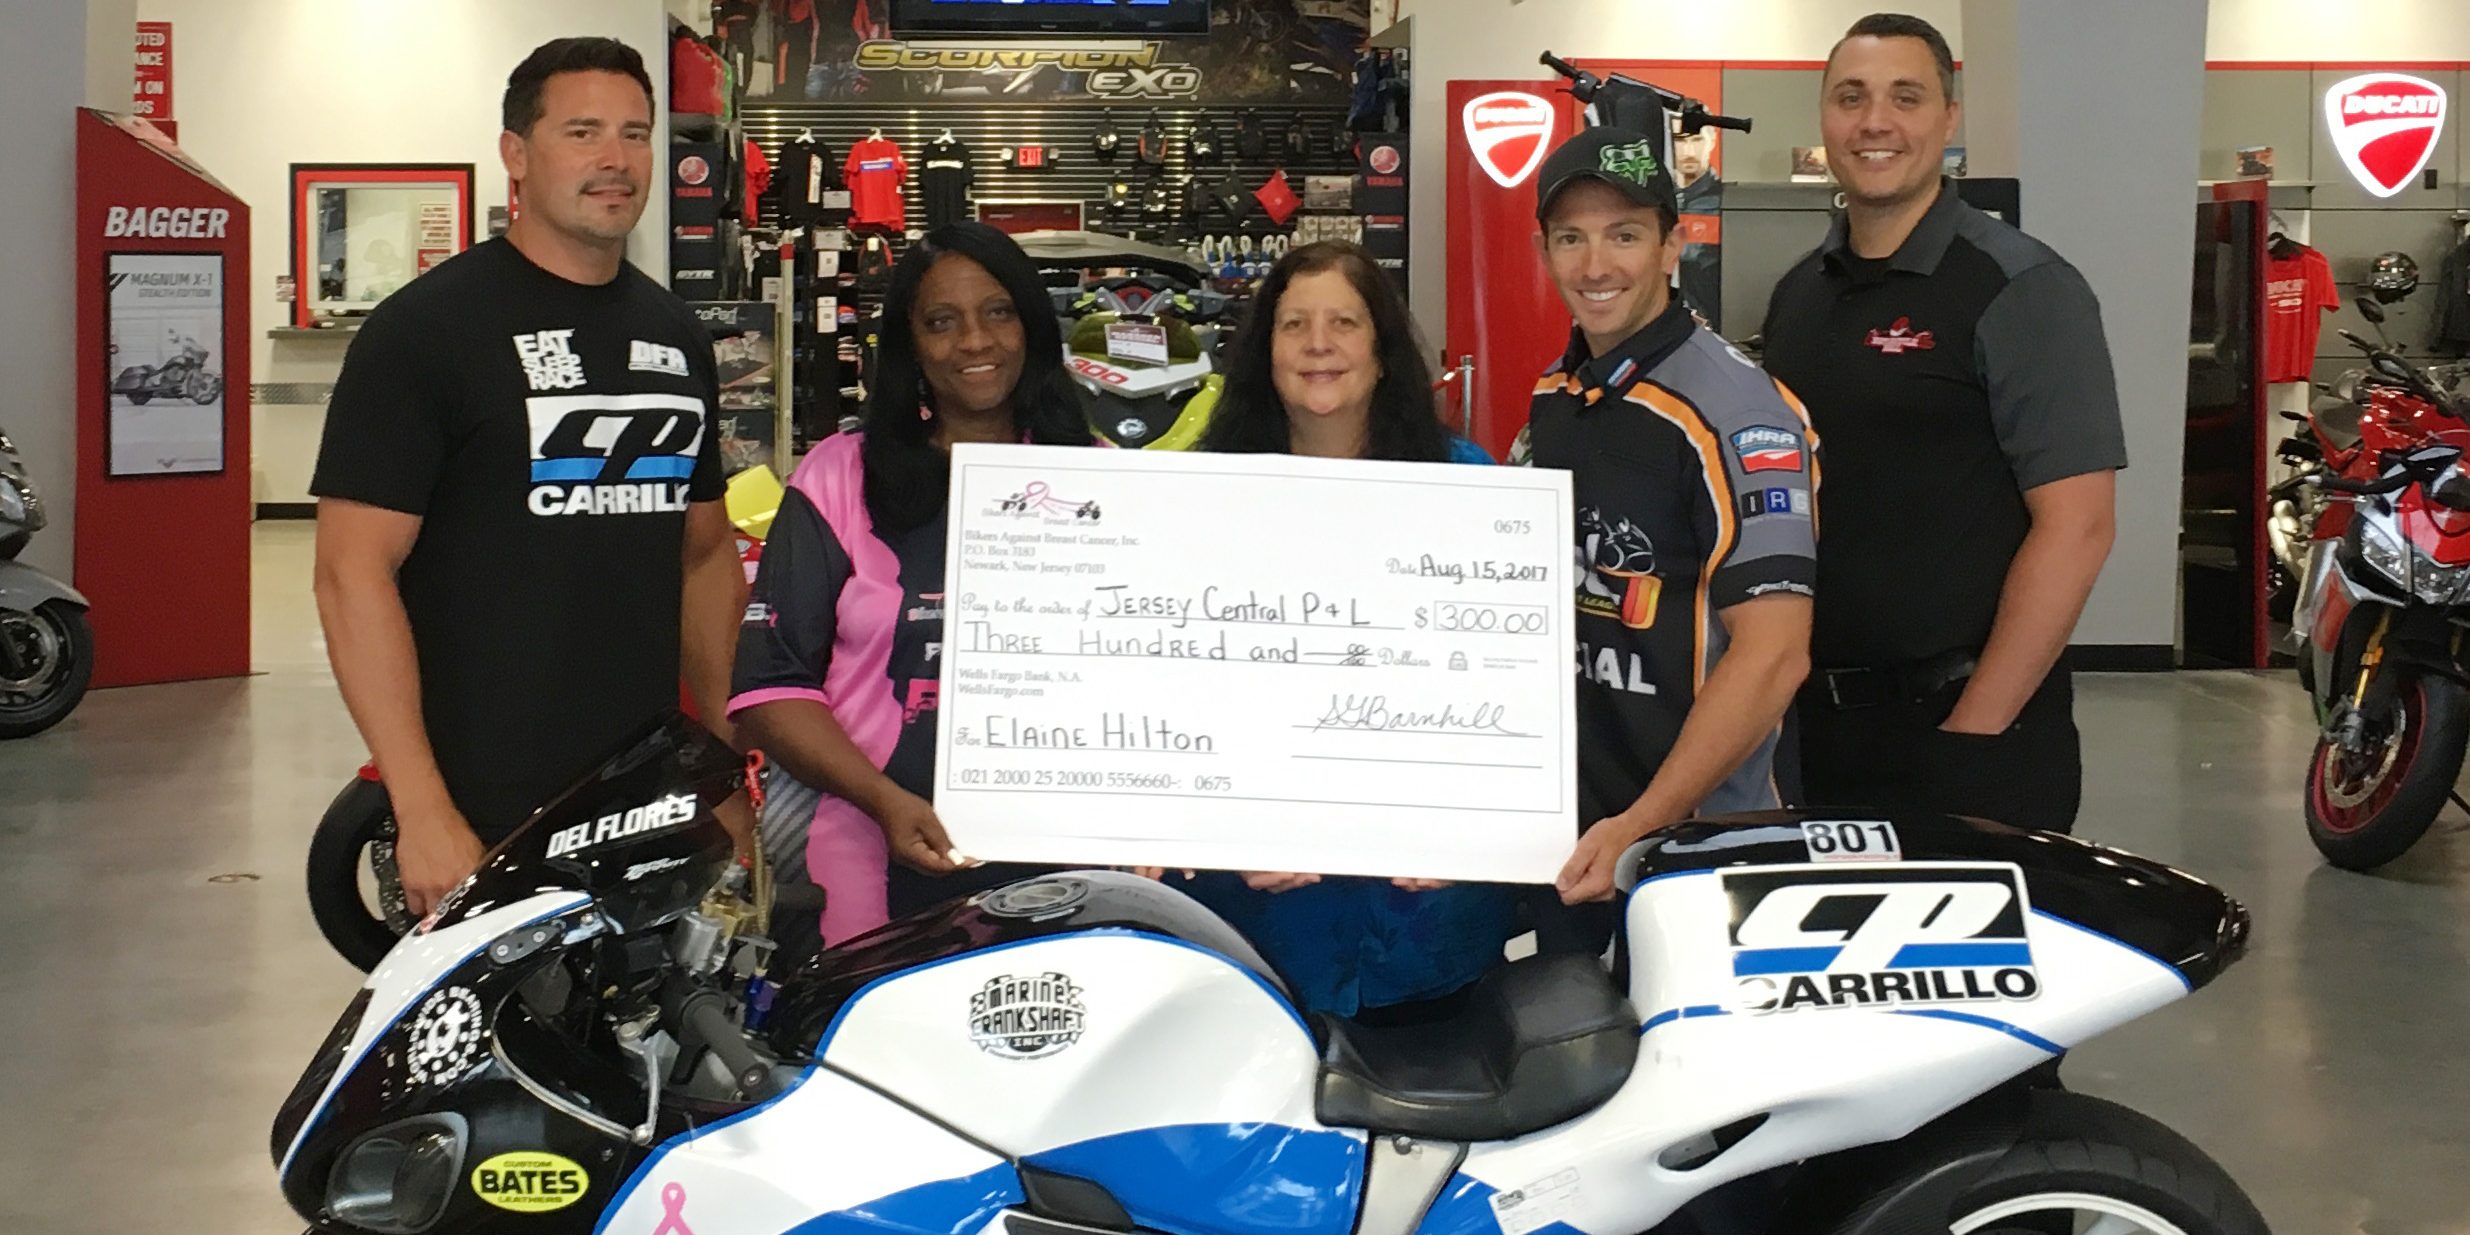 Real Street racer Del Flores, Shelia Green-Barnhill from Bikers Against Breast Cancer, Breast Cancer Patient Elaine Hilton, IDBL President Jack Korpela, Rich Gonnello